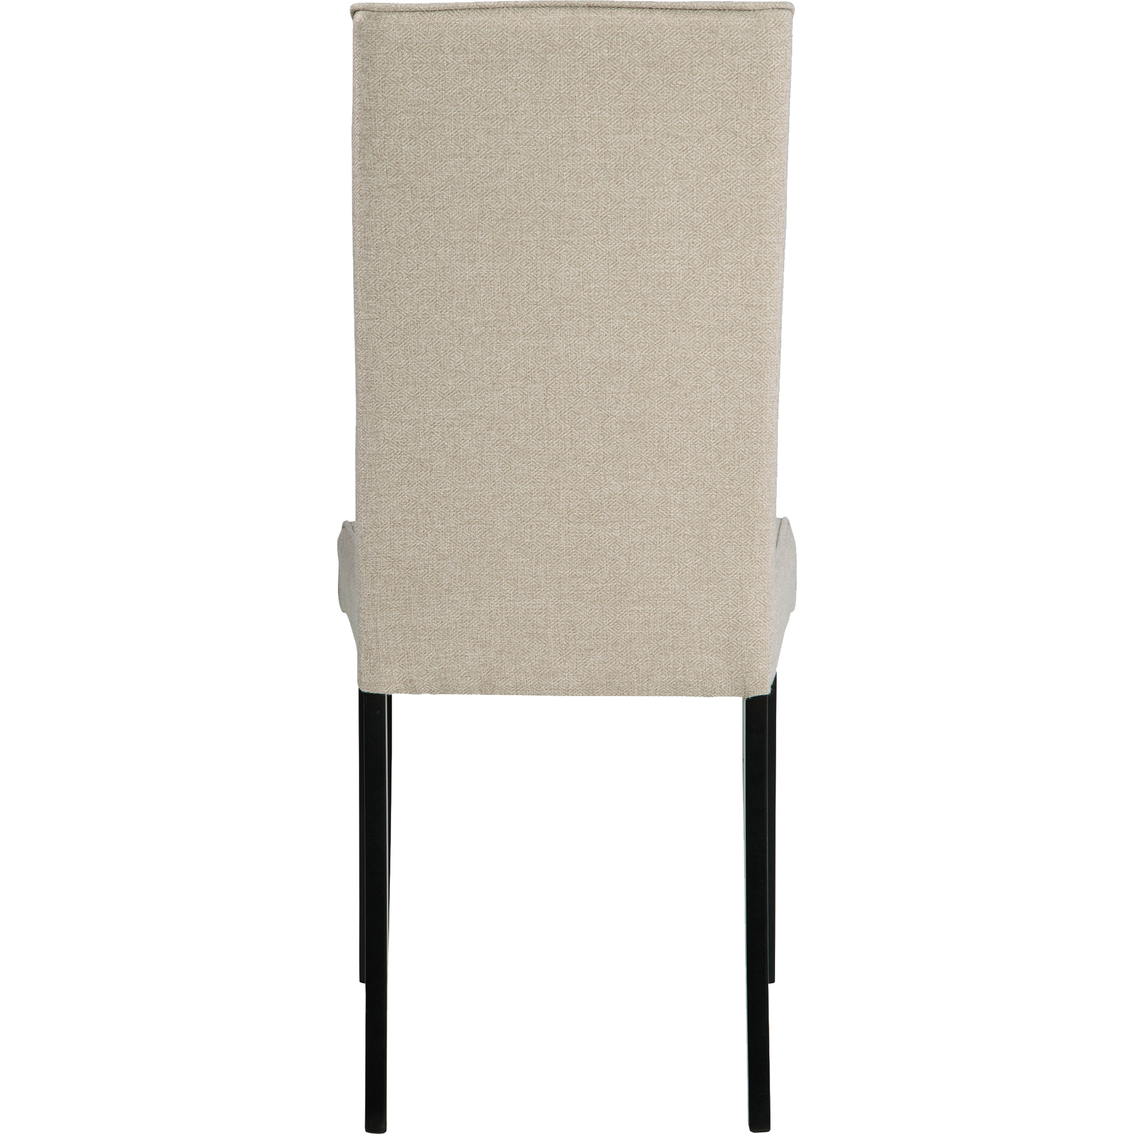 Signature Design by Ashley Kimonte Dining Room Side Chair 2 pk. - Image 3 of 6